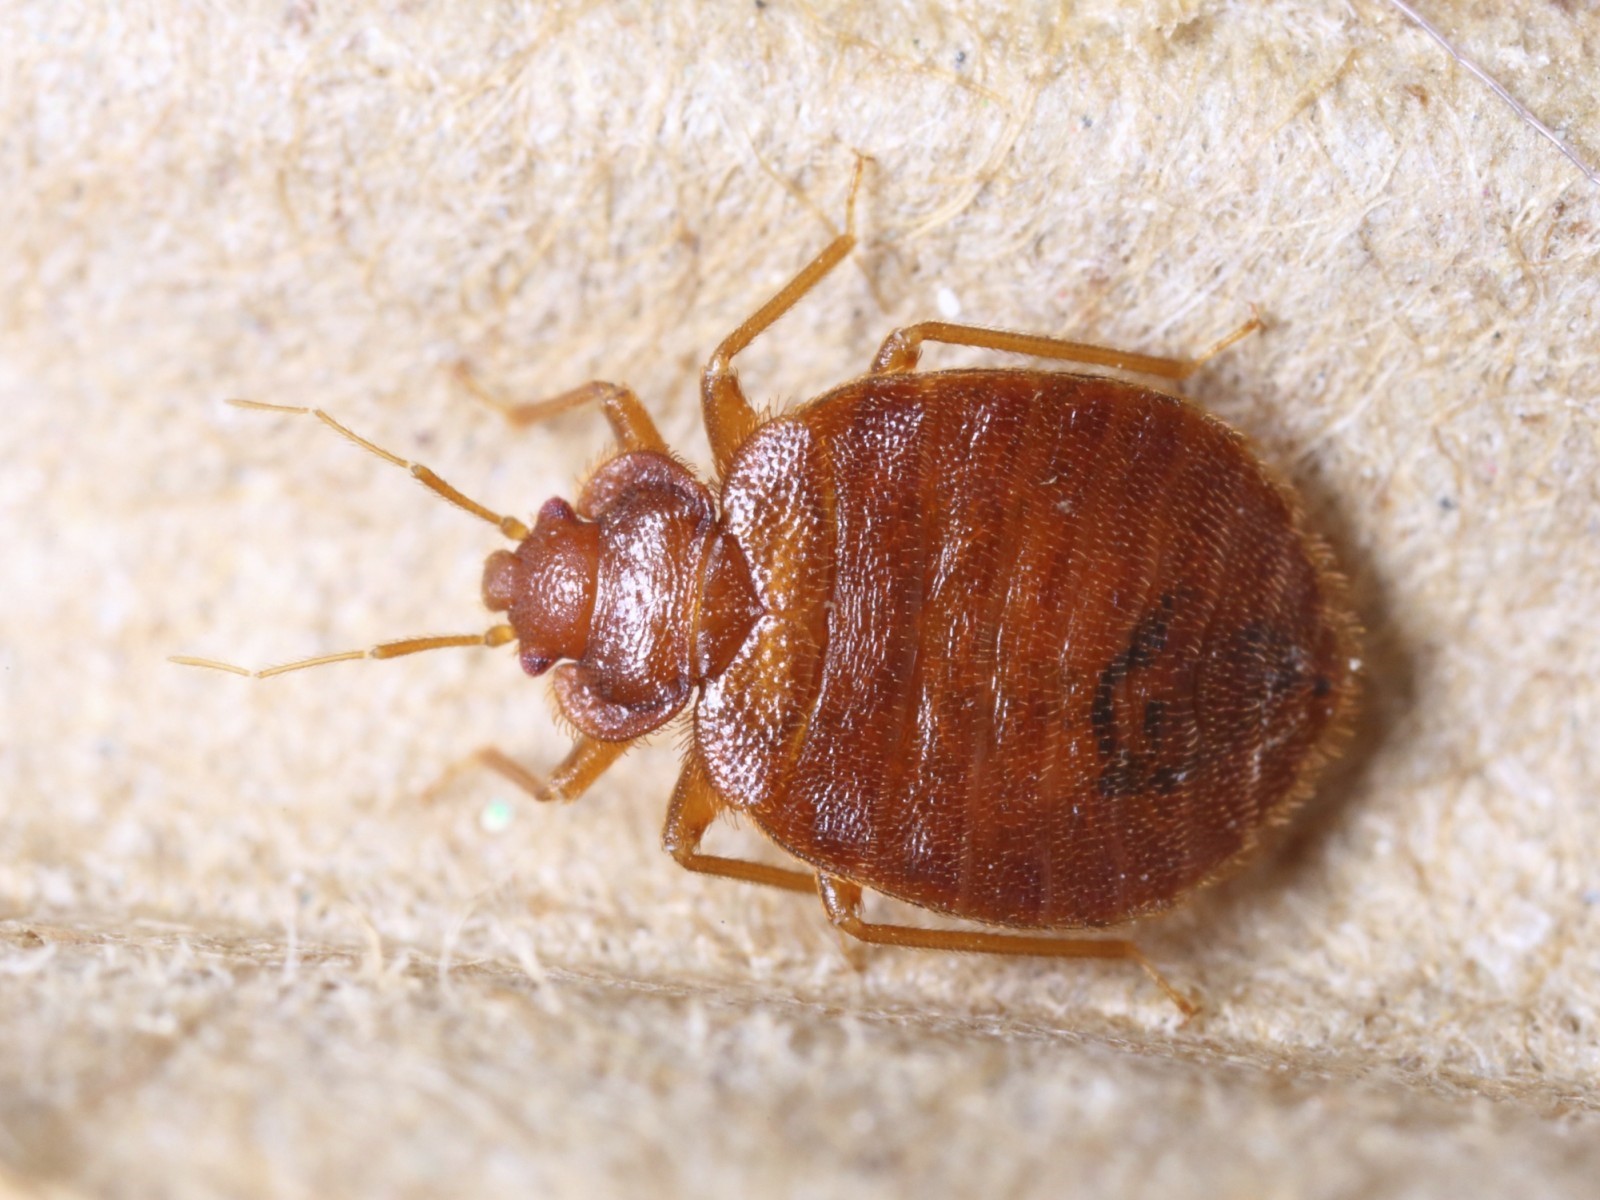 How to fix bed bugs